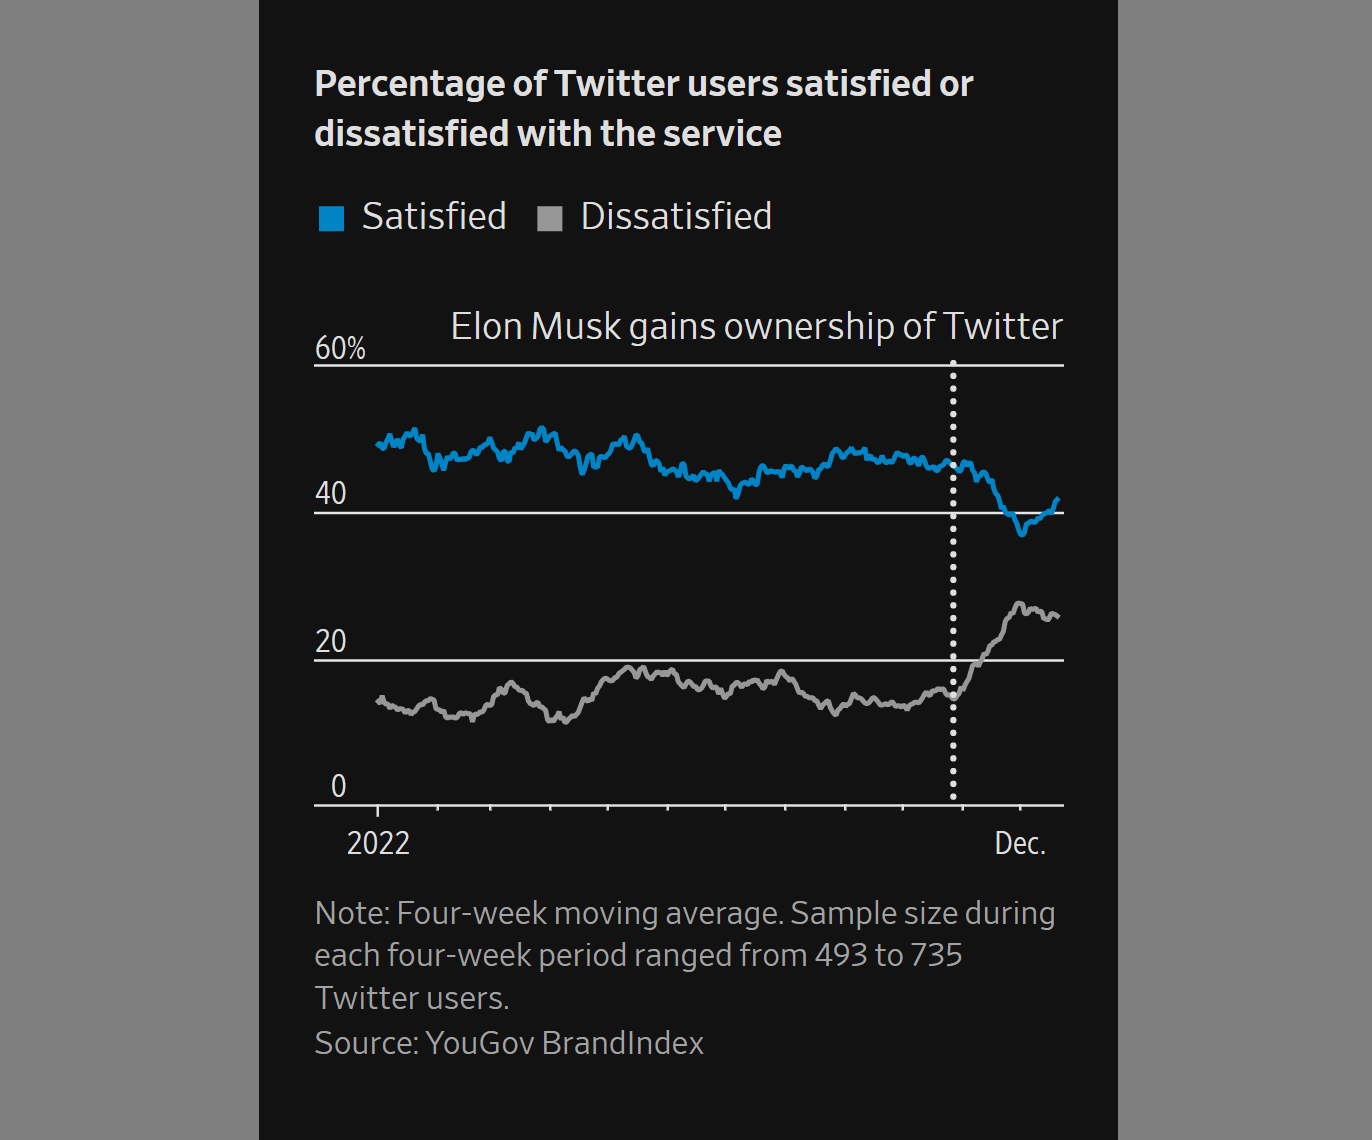 Nom : percentage-of-twitter-users-satisfied-or-dissatisfied-with-the-service.png
Affichages : 1801
Taille : 97,7 Ko